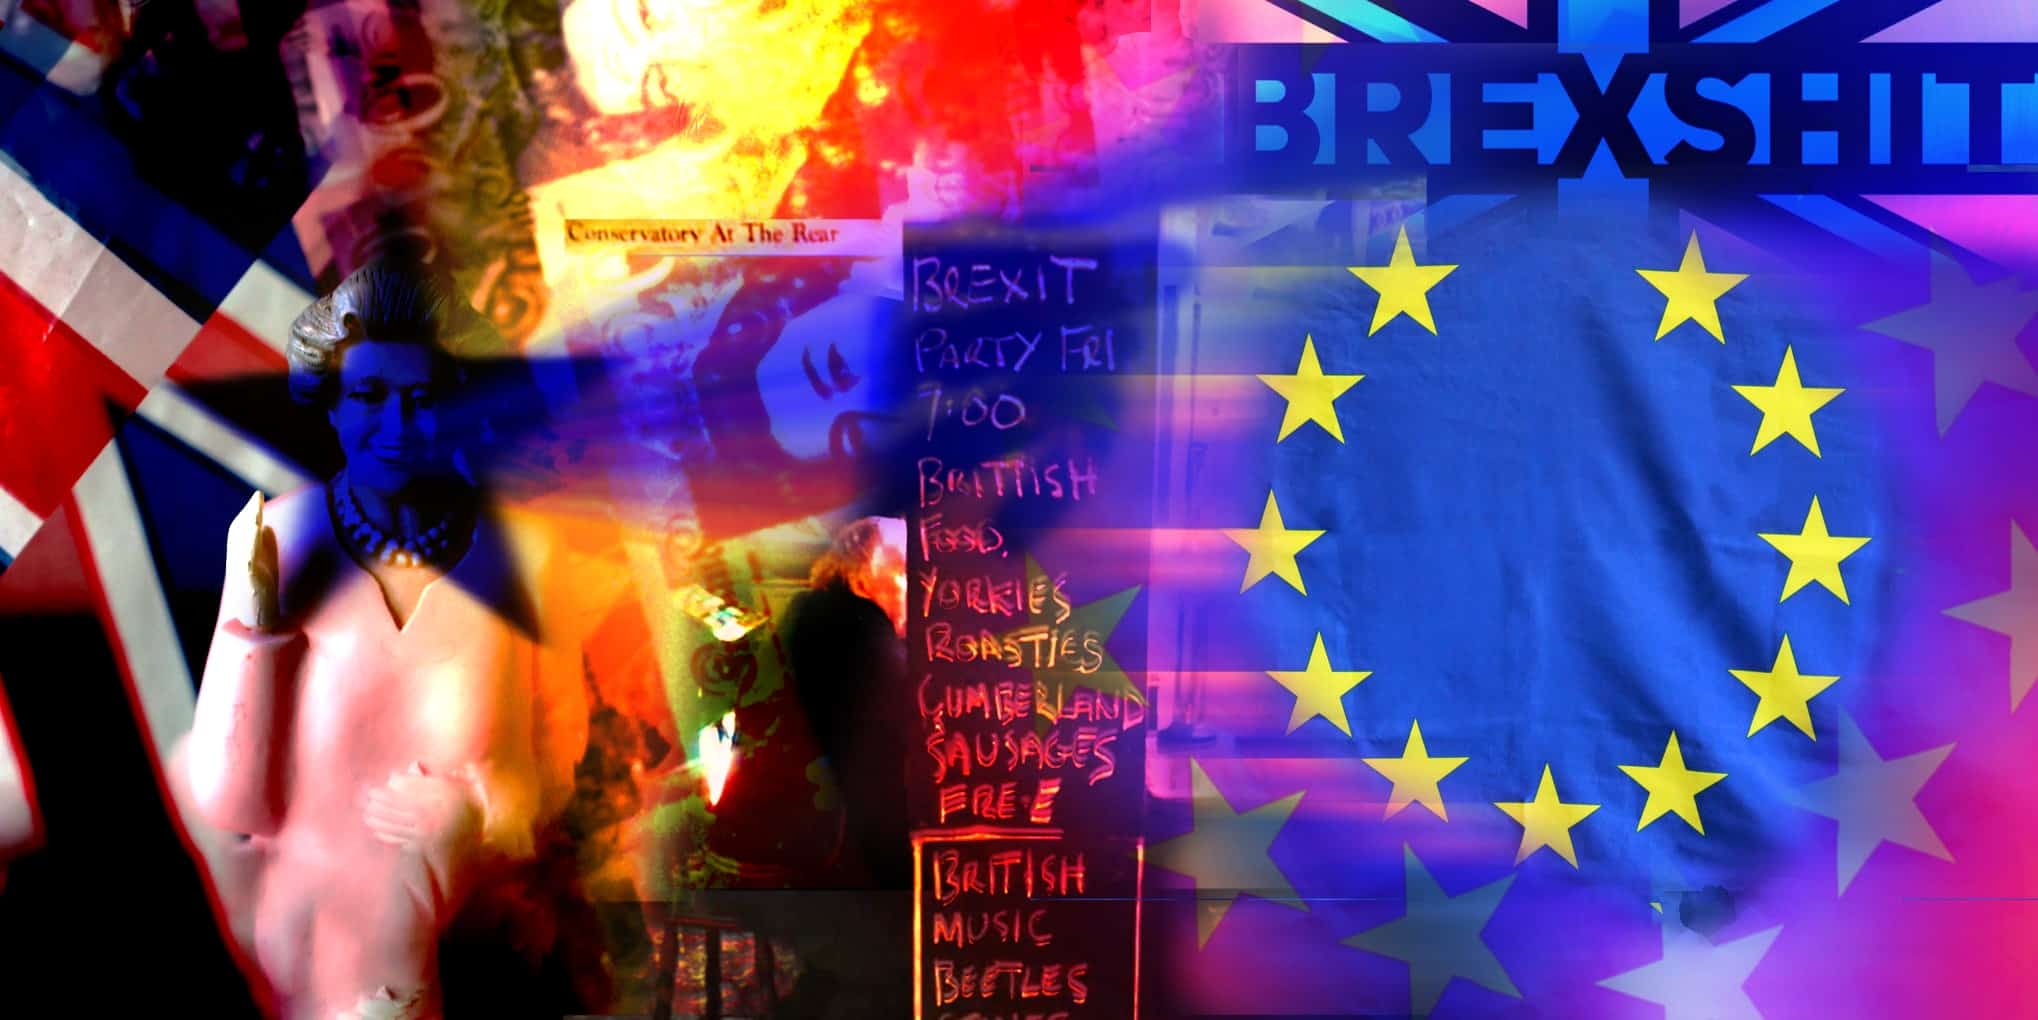 RC 317: Europa Mon Amour / Royal Flush Brexit themed musical podcast, EU and the rest as we leave the EU the first time.